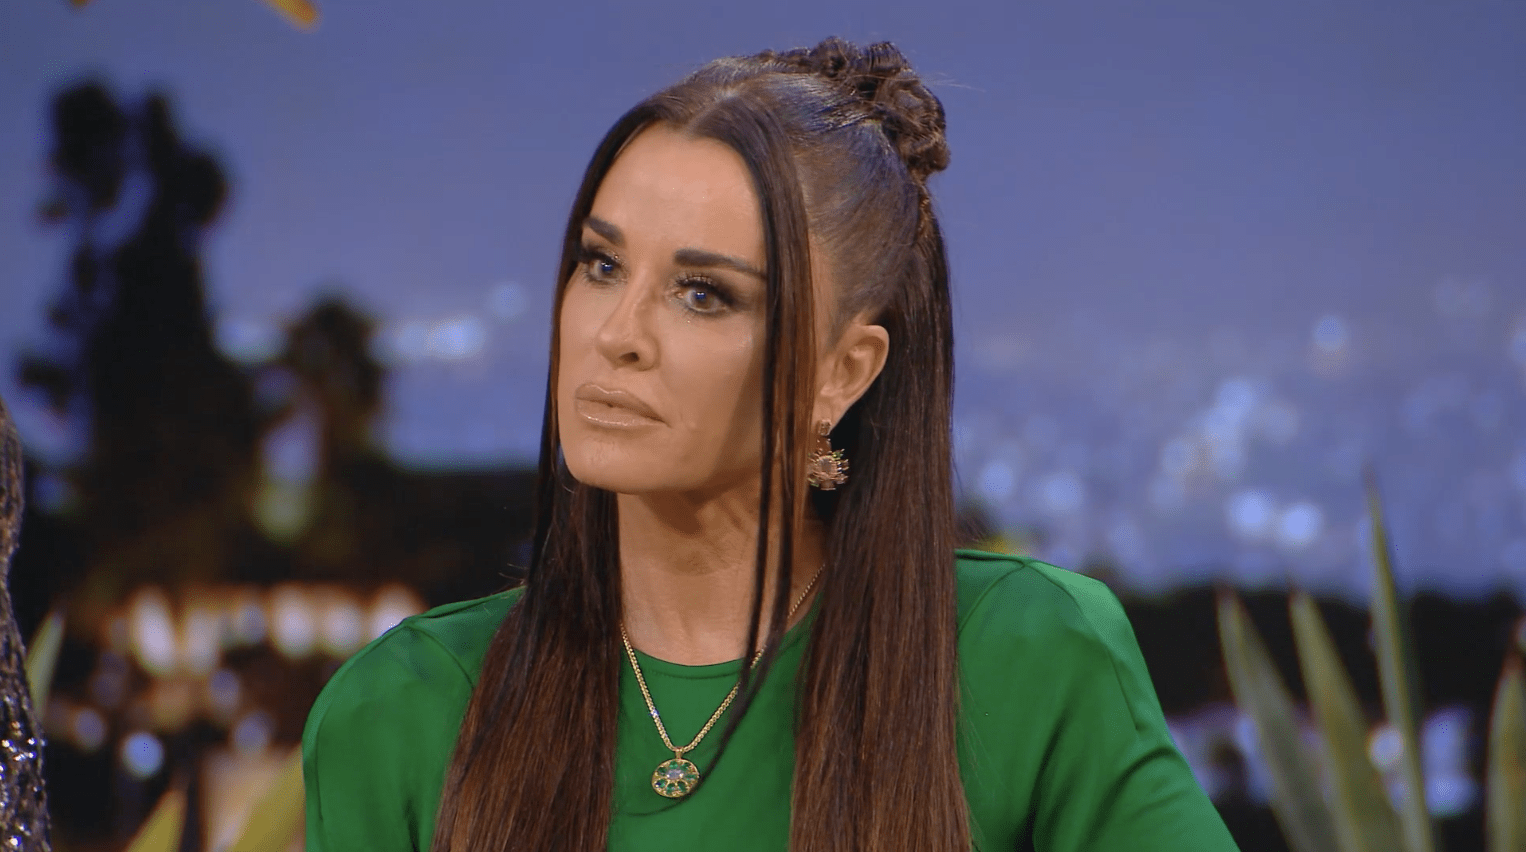 ‘RHOBH’ RECAP: Kyle Richards EXPLODES After Sutton and Dorit Call Out Her Marriage Lies!